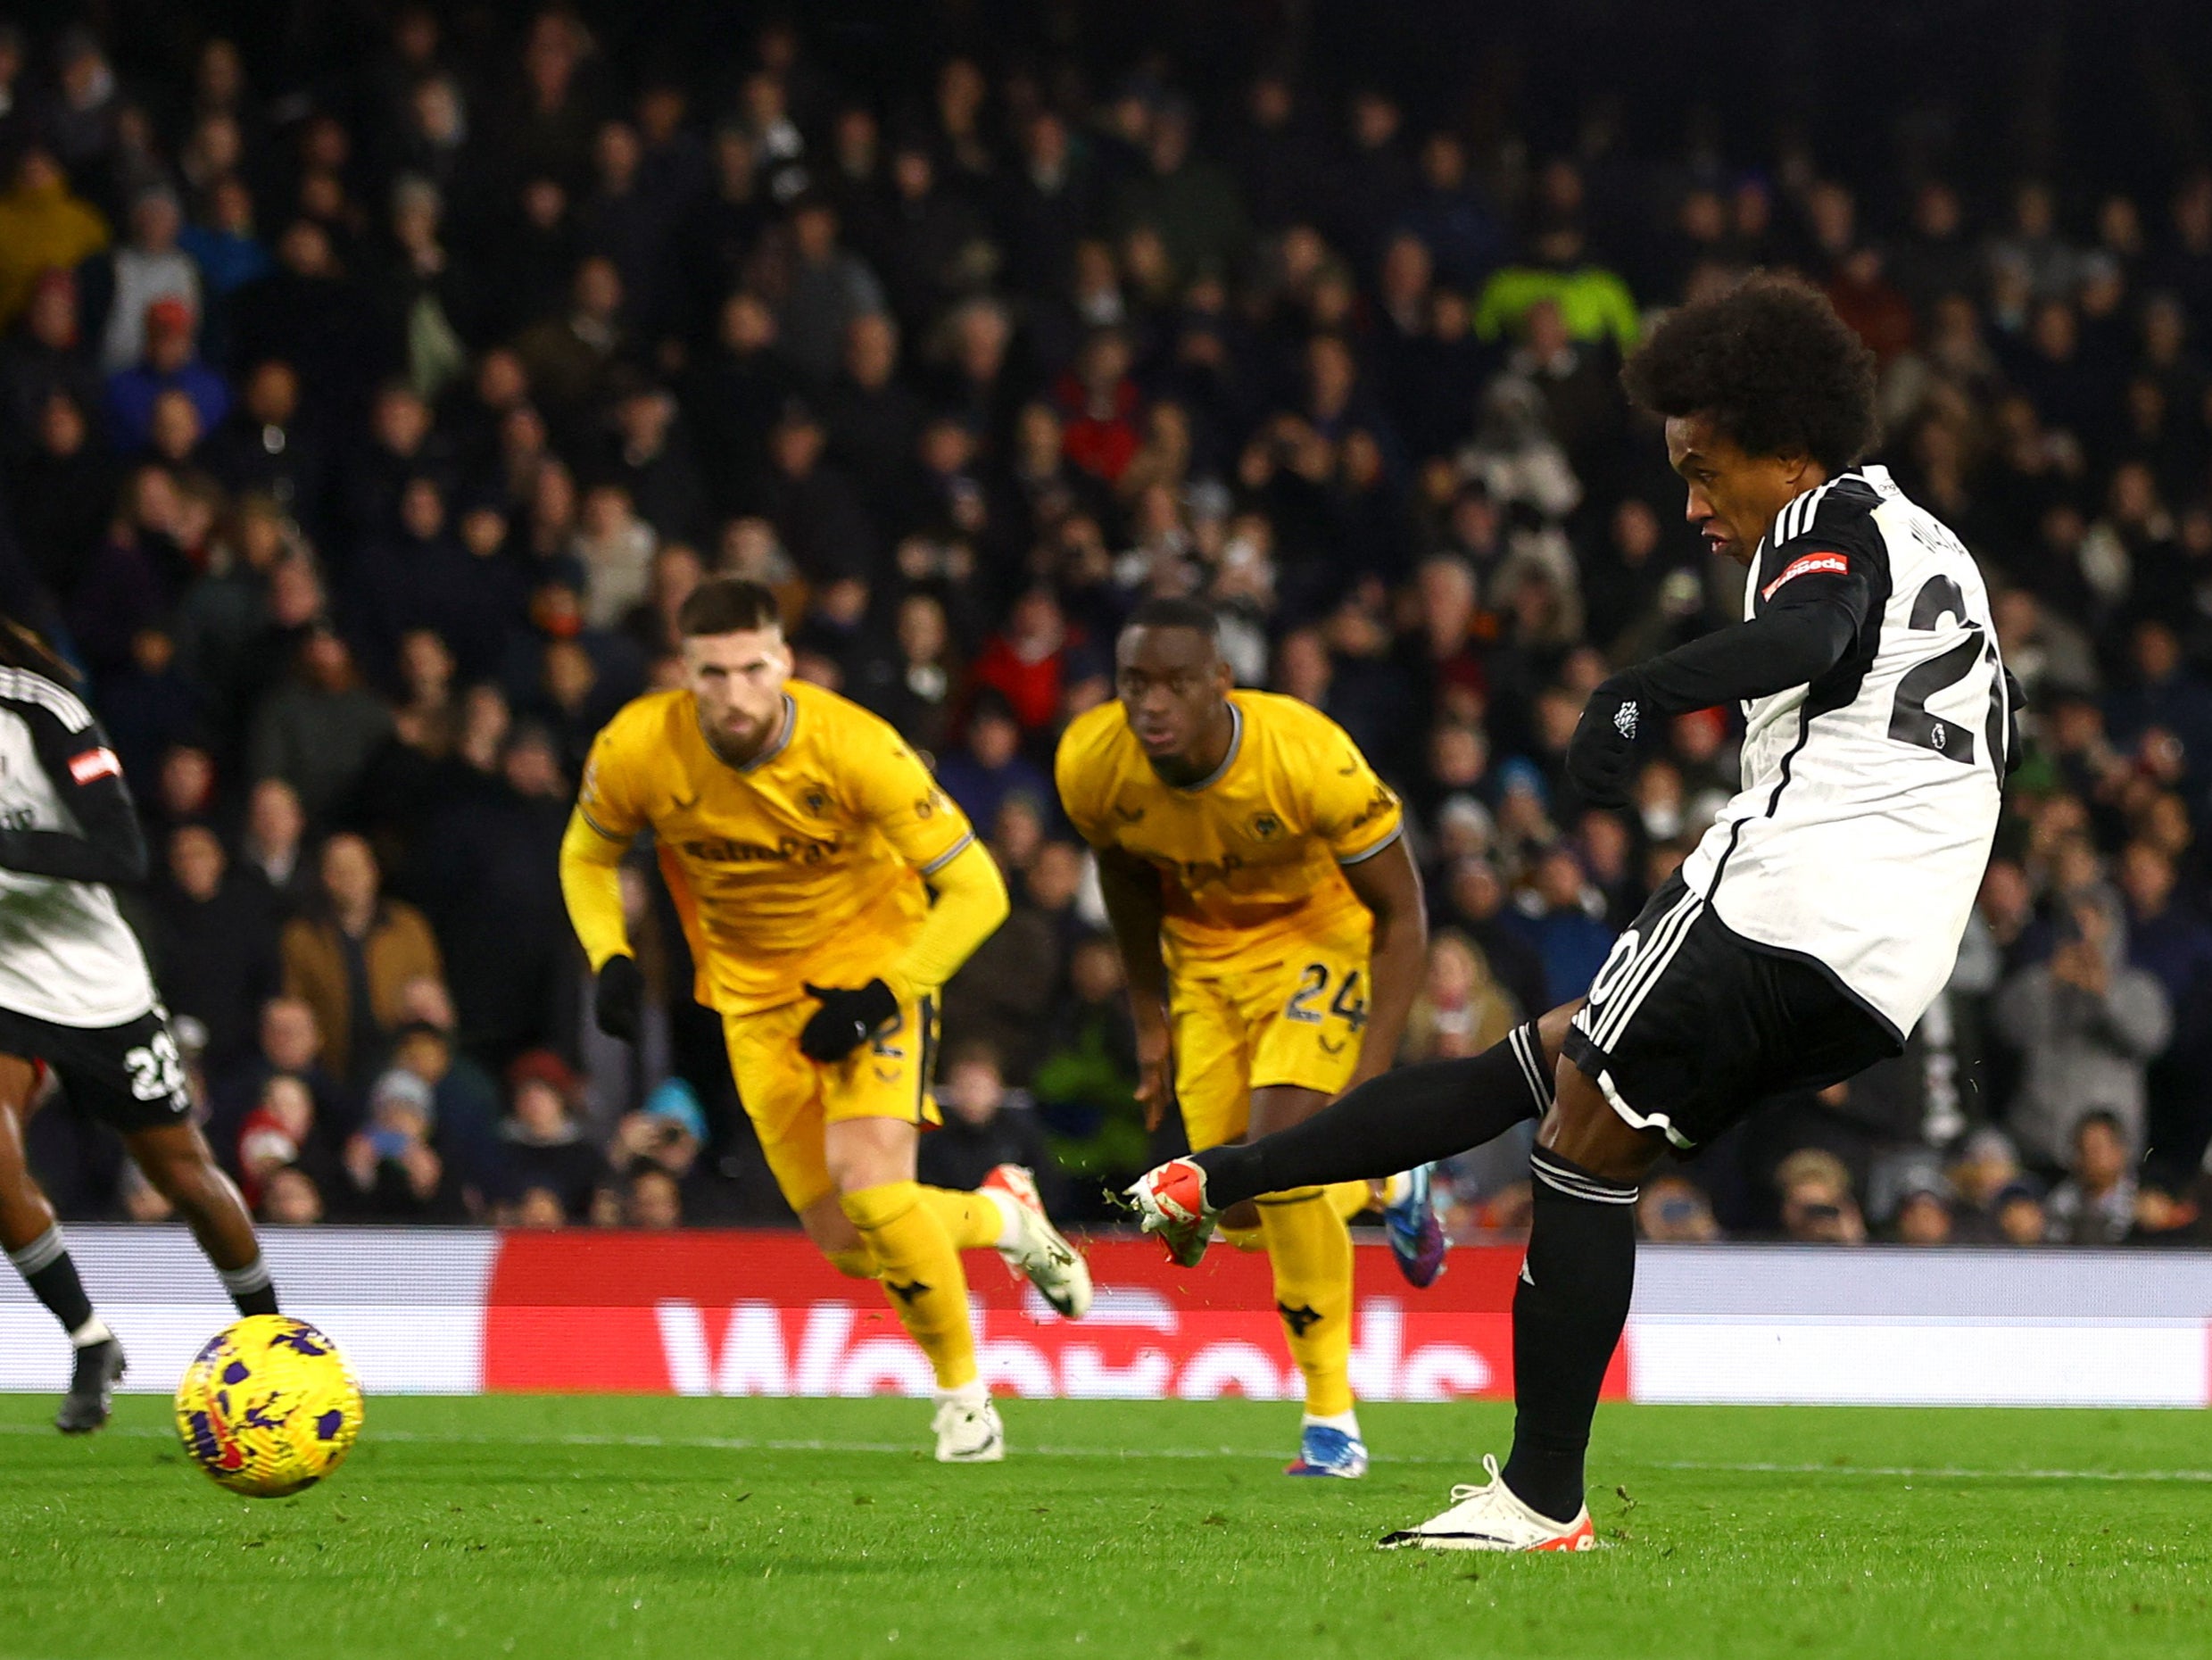 Willian converted from 12 yards late on to give Fulham victory over Wolves